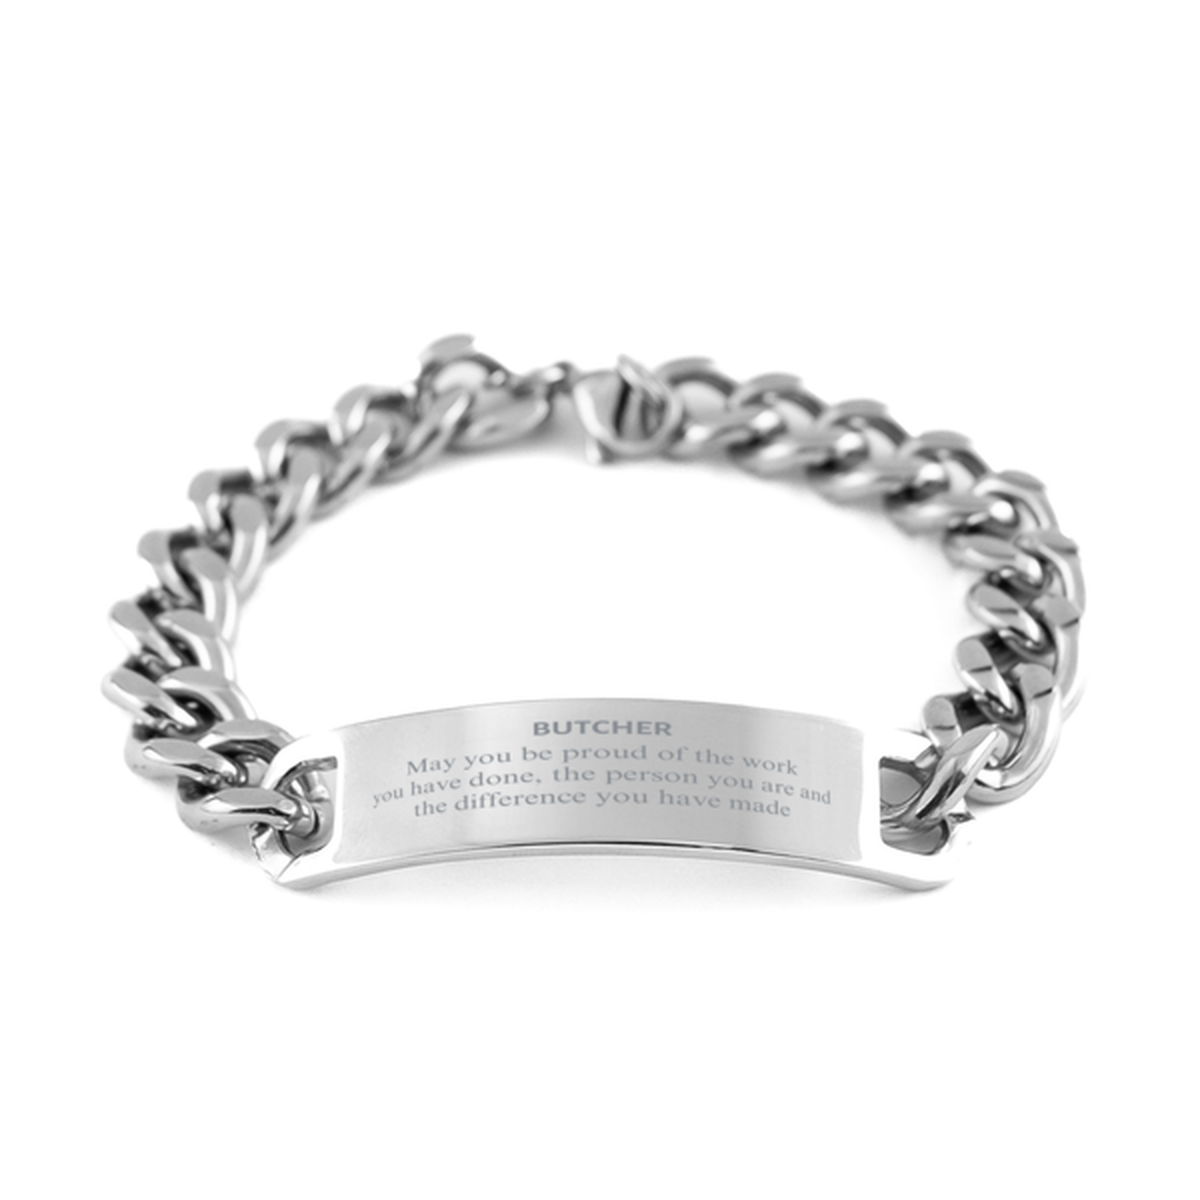 Butcher May you be proud of the work you have done, Retirement Butcher Cuban Chain Stainless Steel Bracelet for Colleague Appreciation Gifts Amazing for Butcher